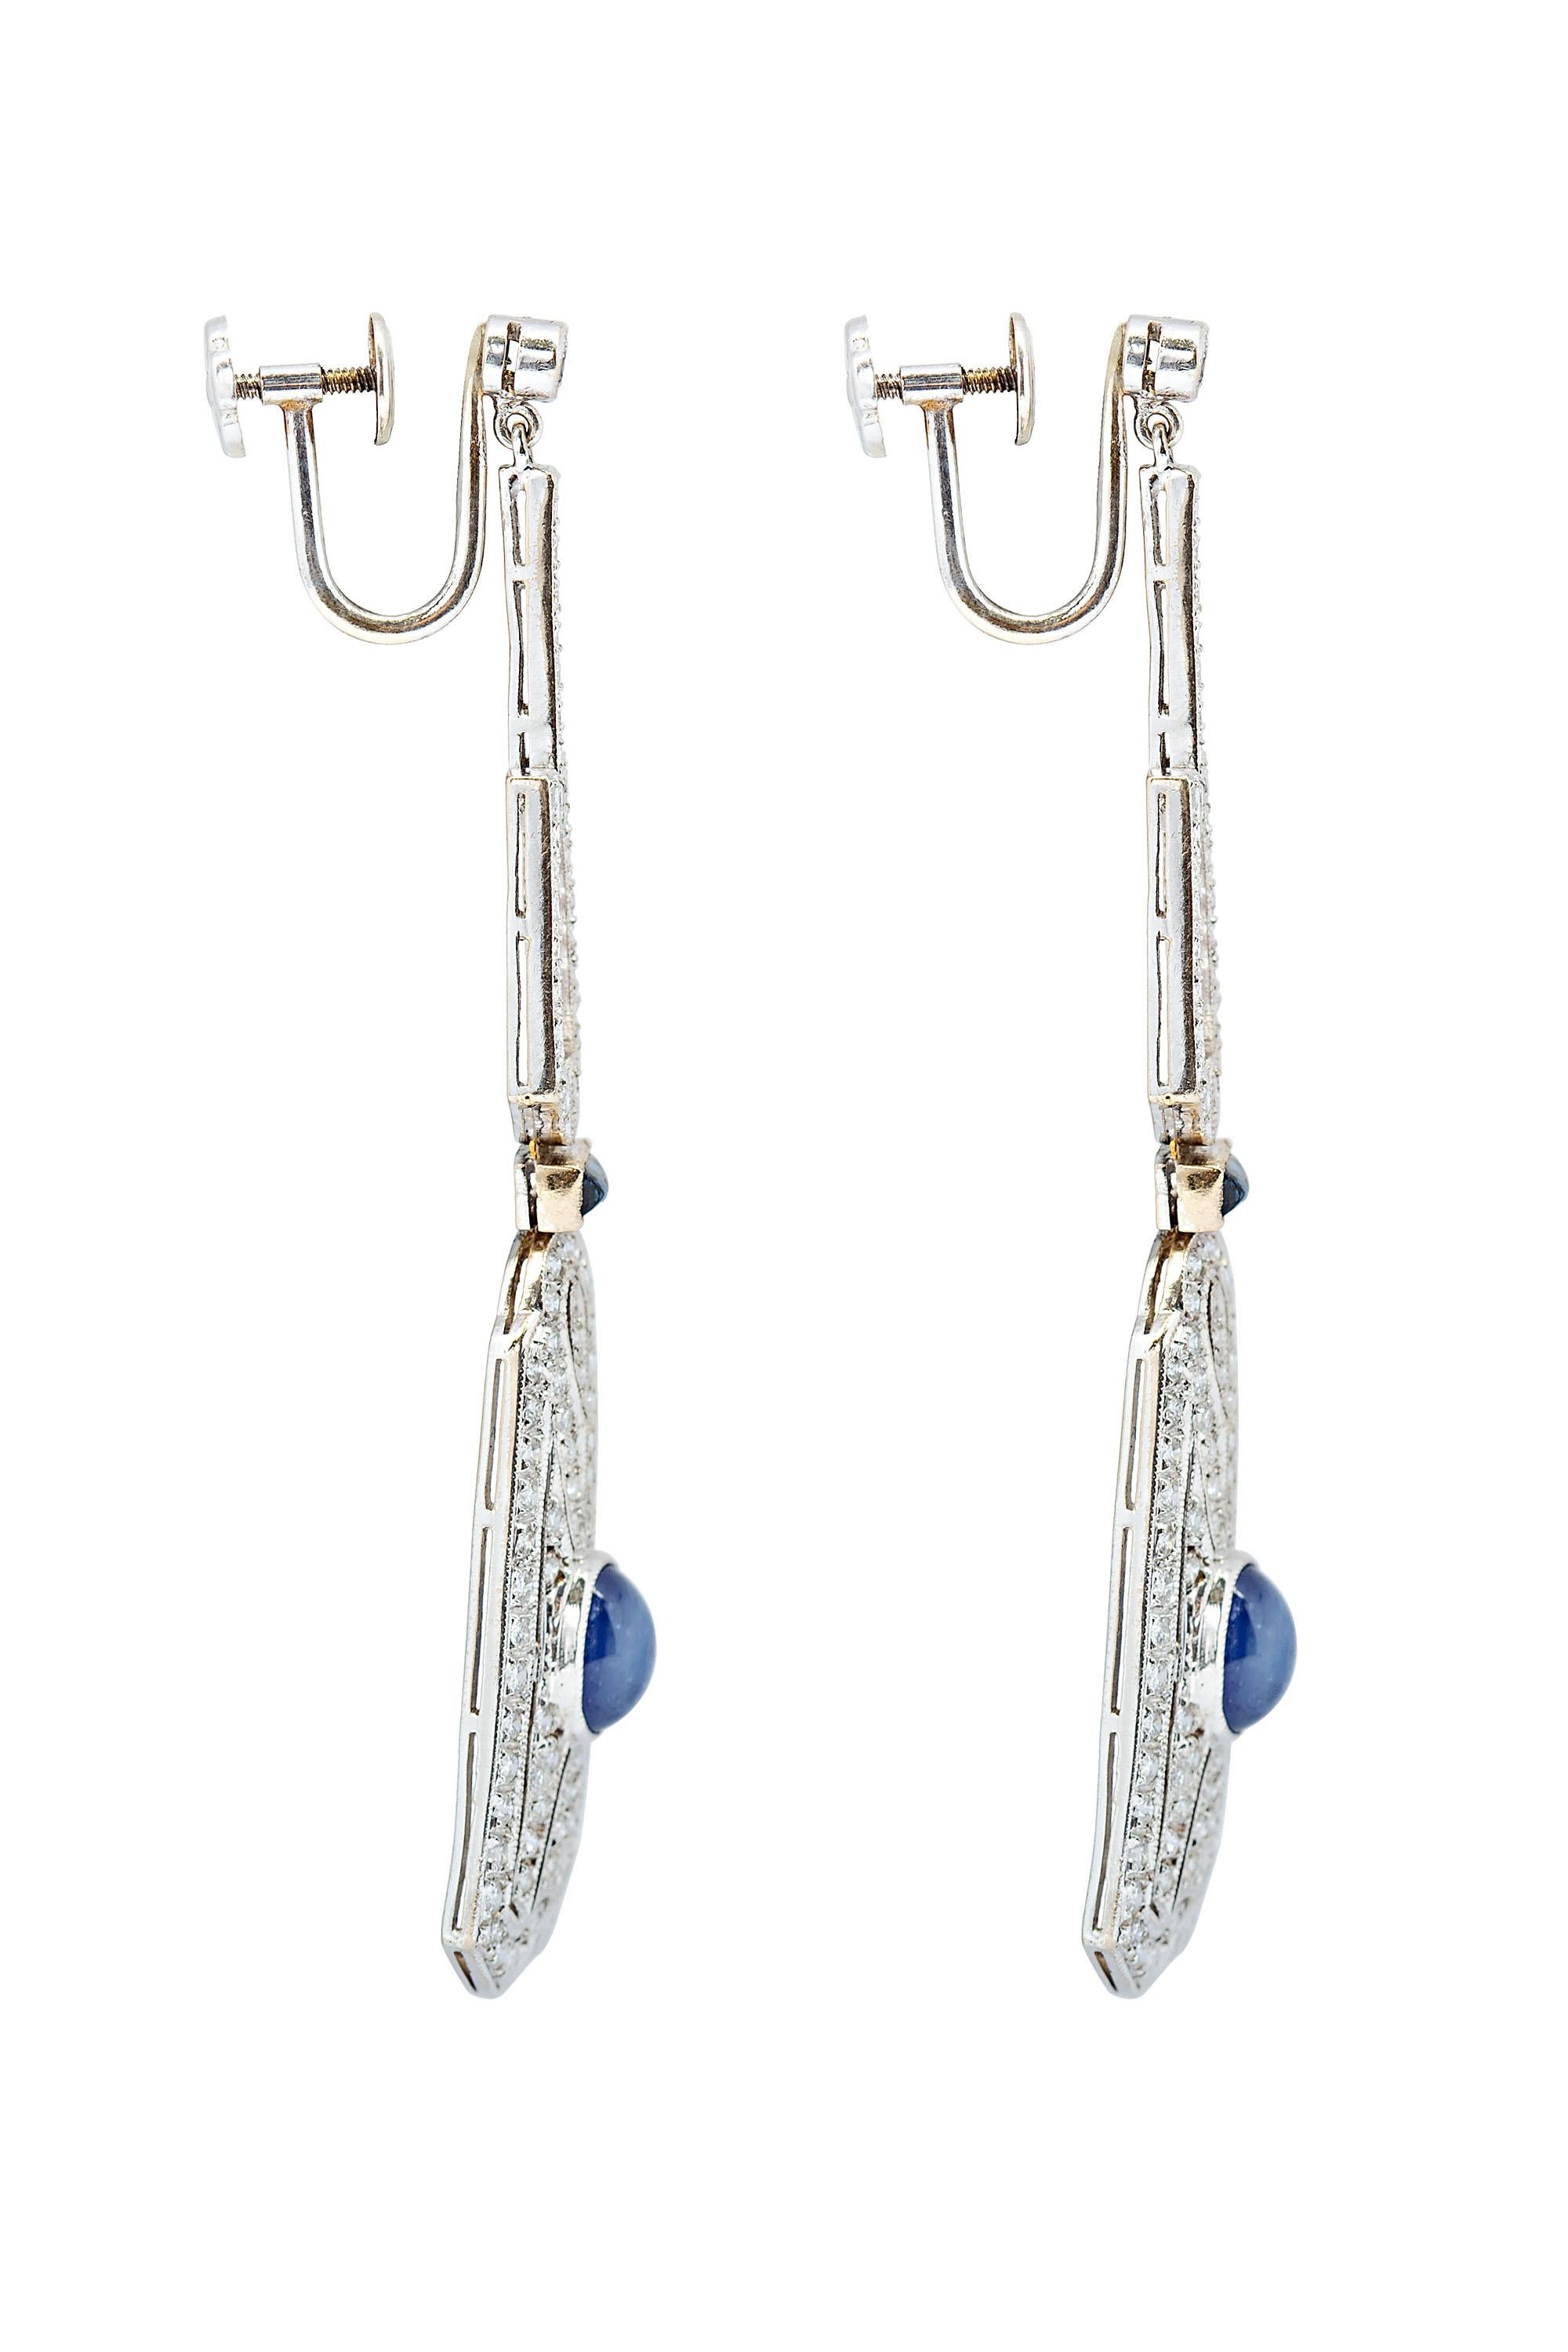 These sensational and beautifully detailed Art Deco style earrings are composed of geometric diamond pave drops each highlighting a bright blue cabochon cut oval sapphire. The drops are suspended by two rectangular cut sapphires surmounted by open